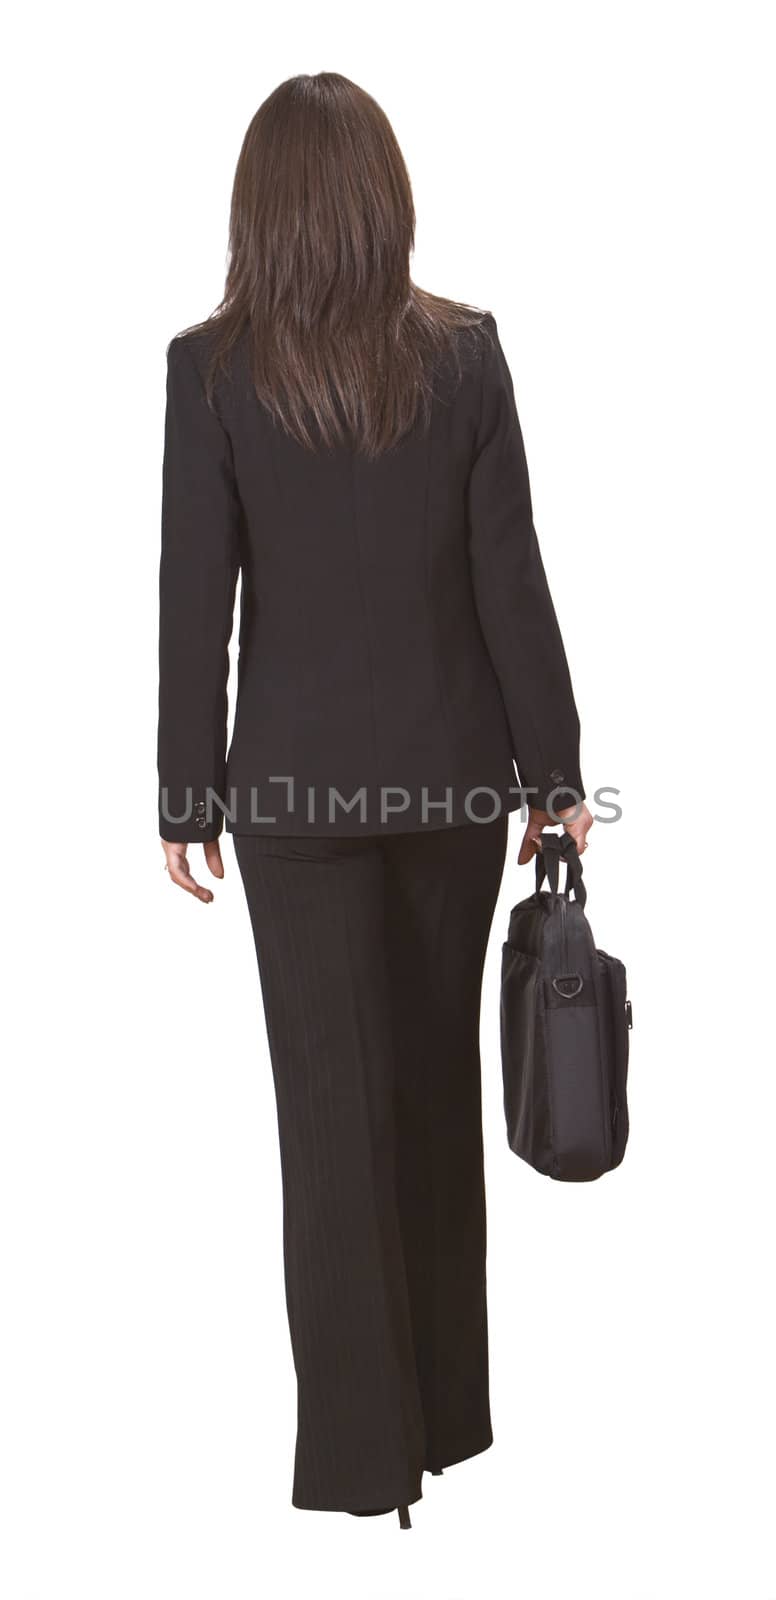 Back of a businesswoman with a laptop bag against a white background.